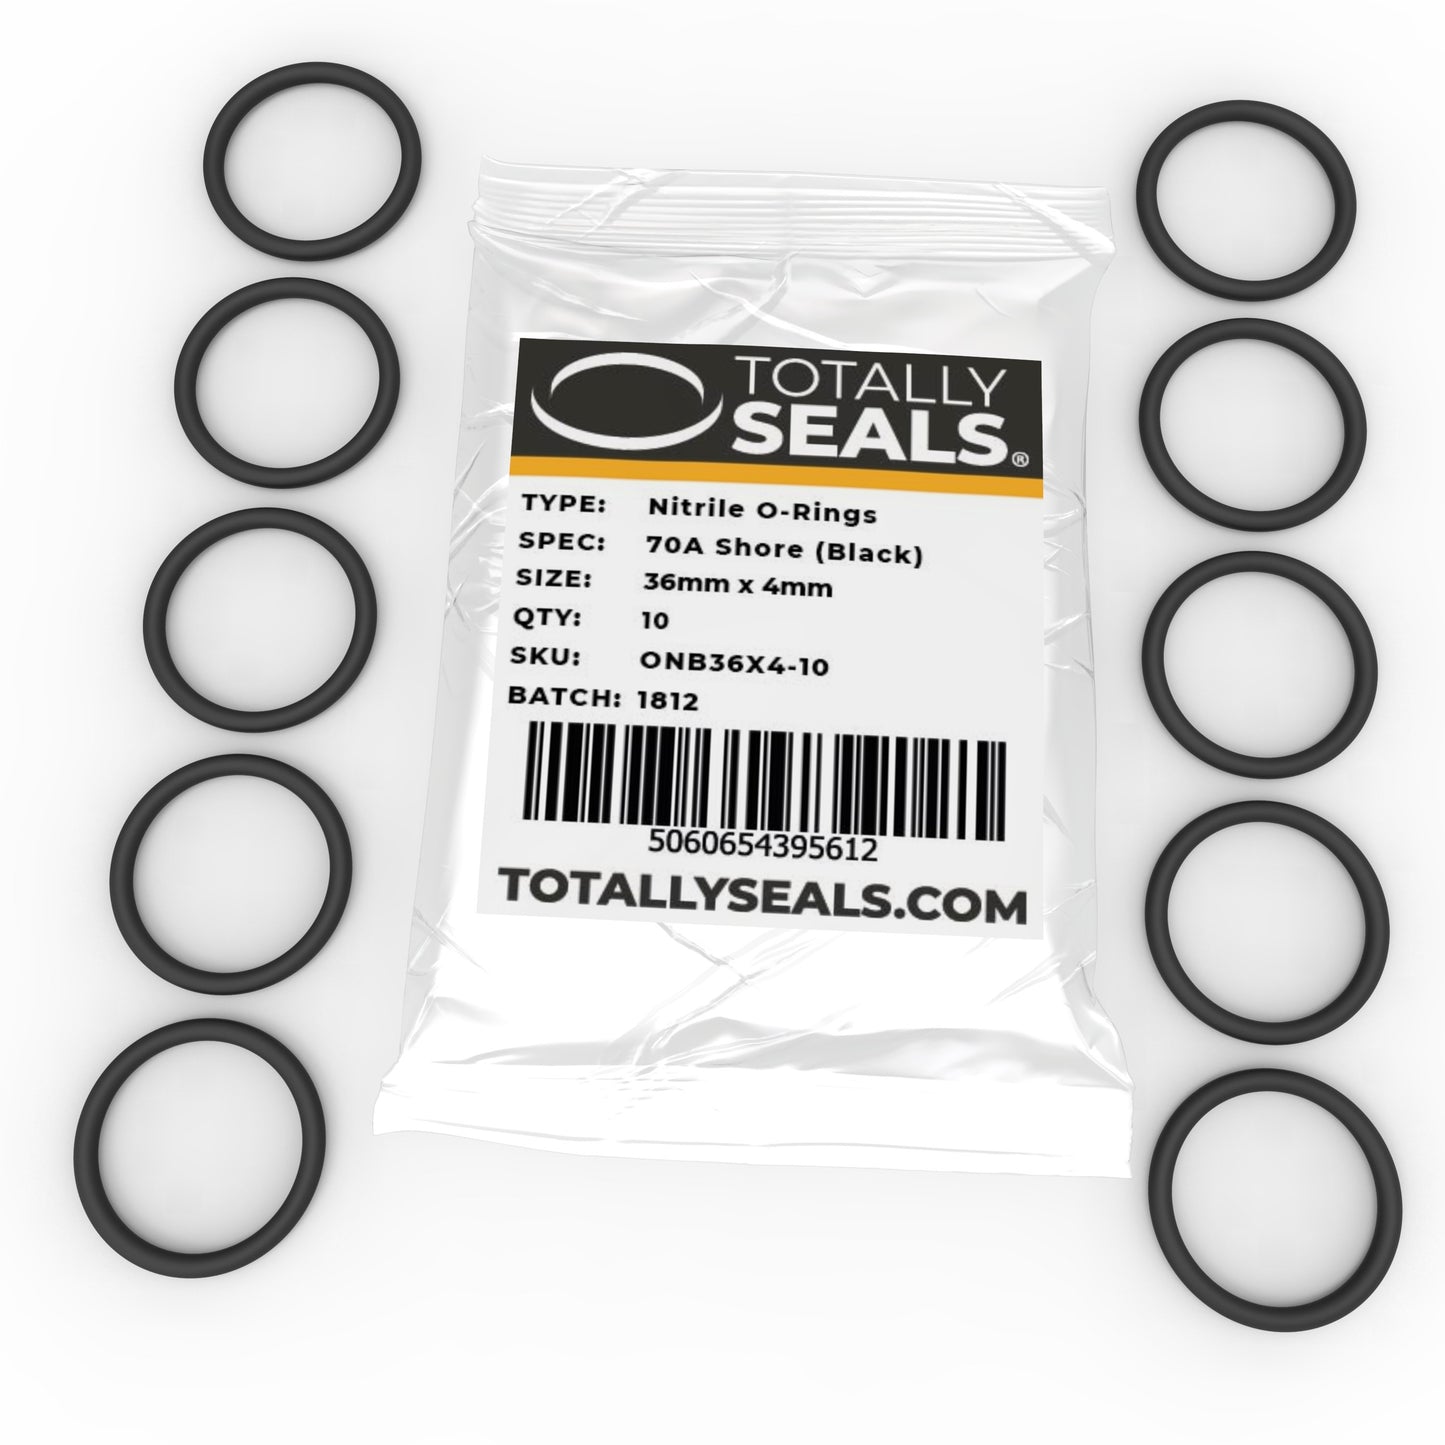 36mm x 4mm (44mm OD) Nitrile O-Rings - Totally Seals®